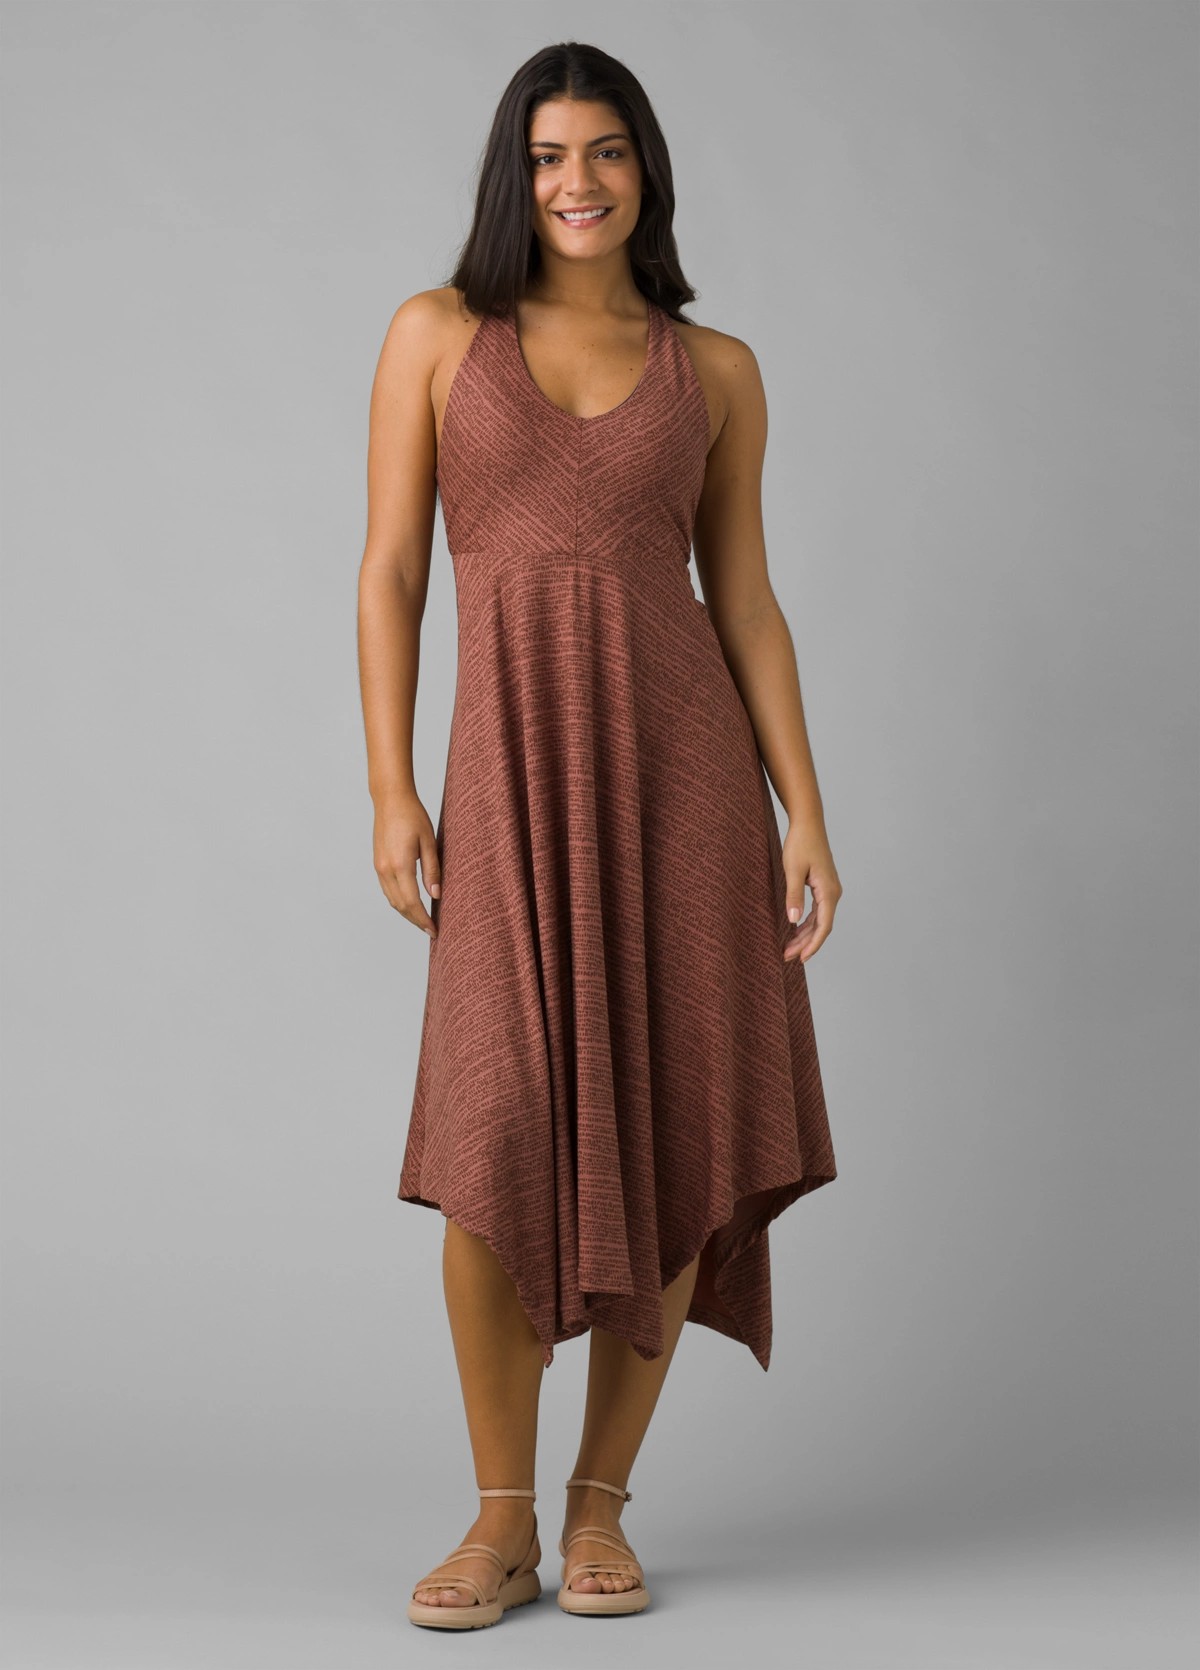 FEATHER & FIND Prana Dress Reach For The Sky – Matilda's Life Style